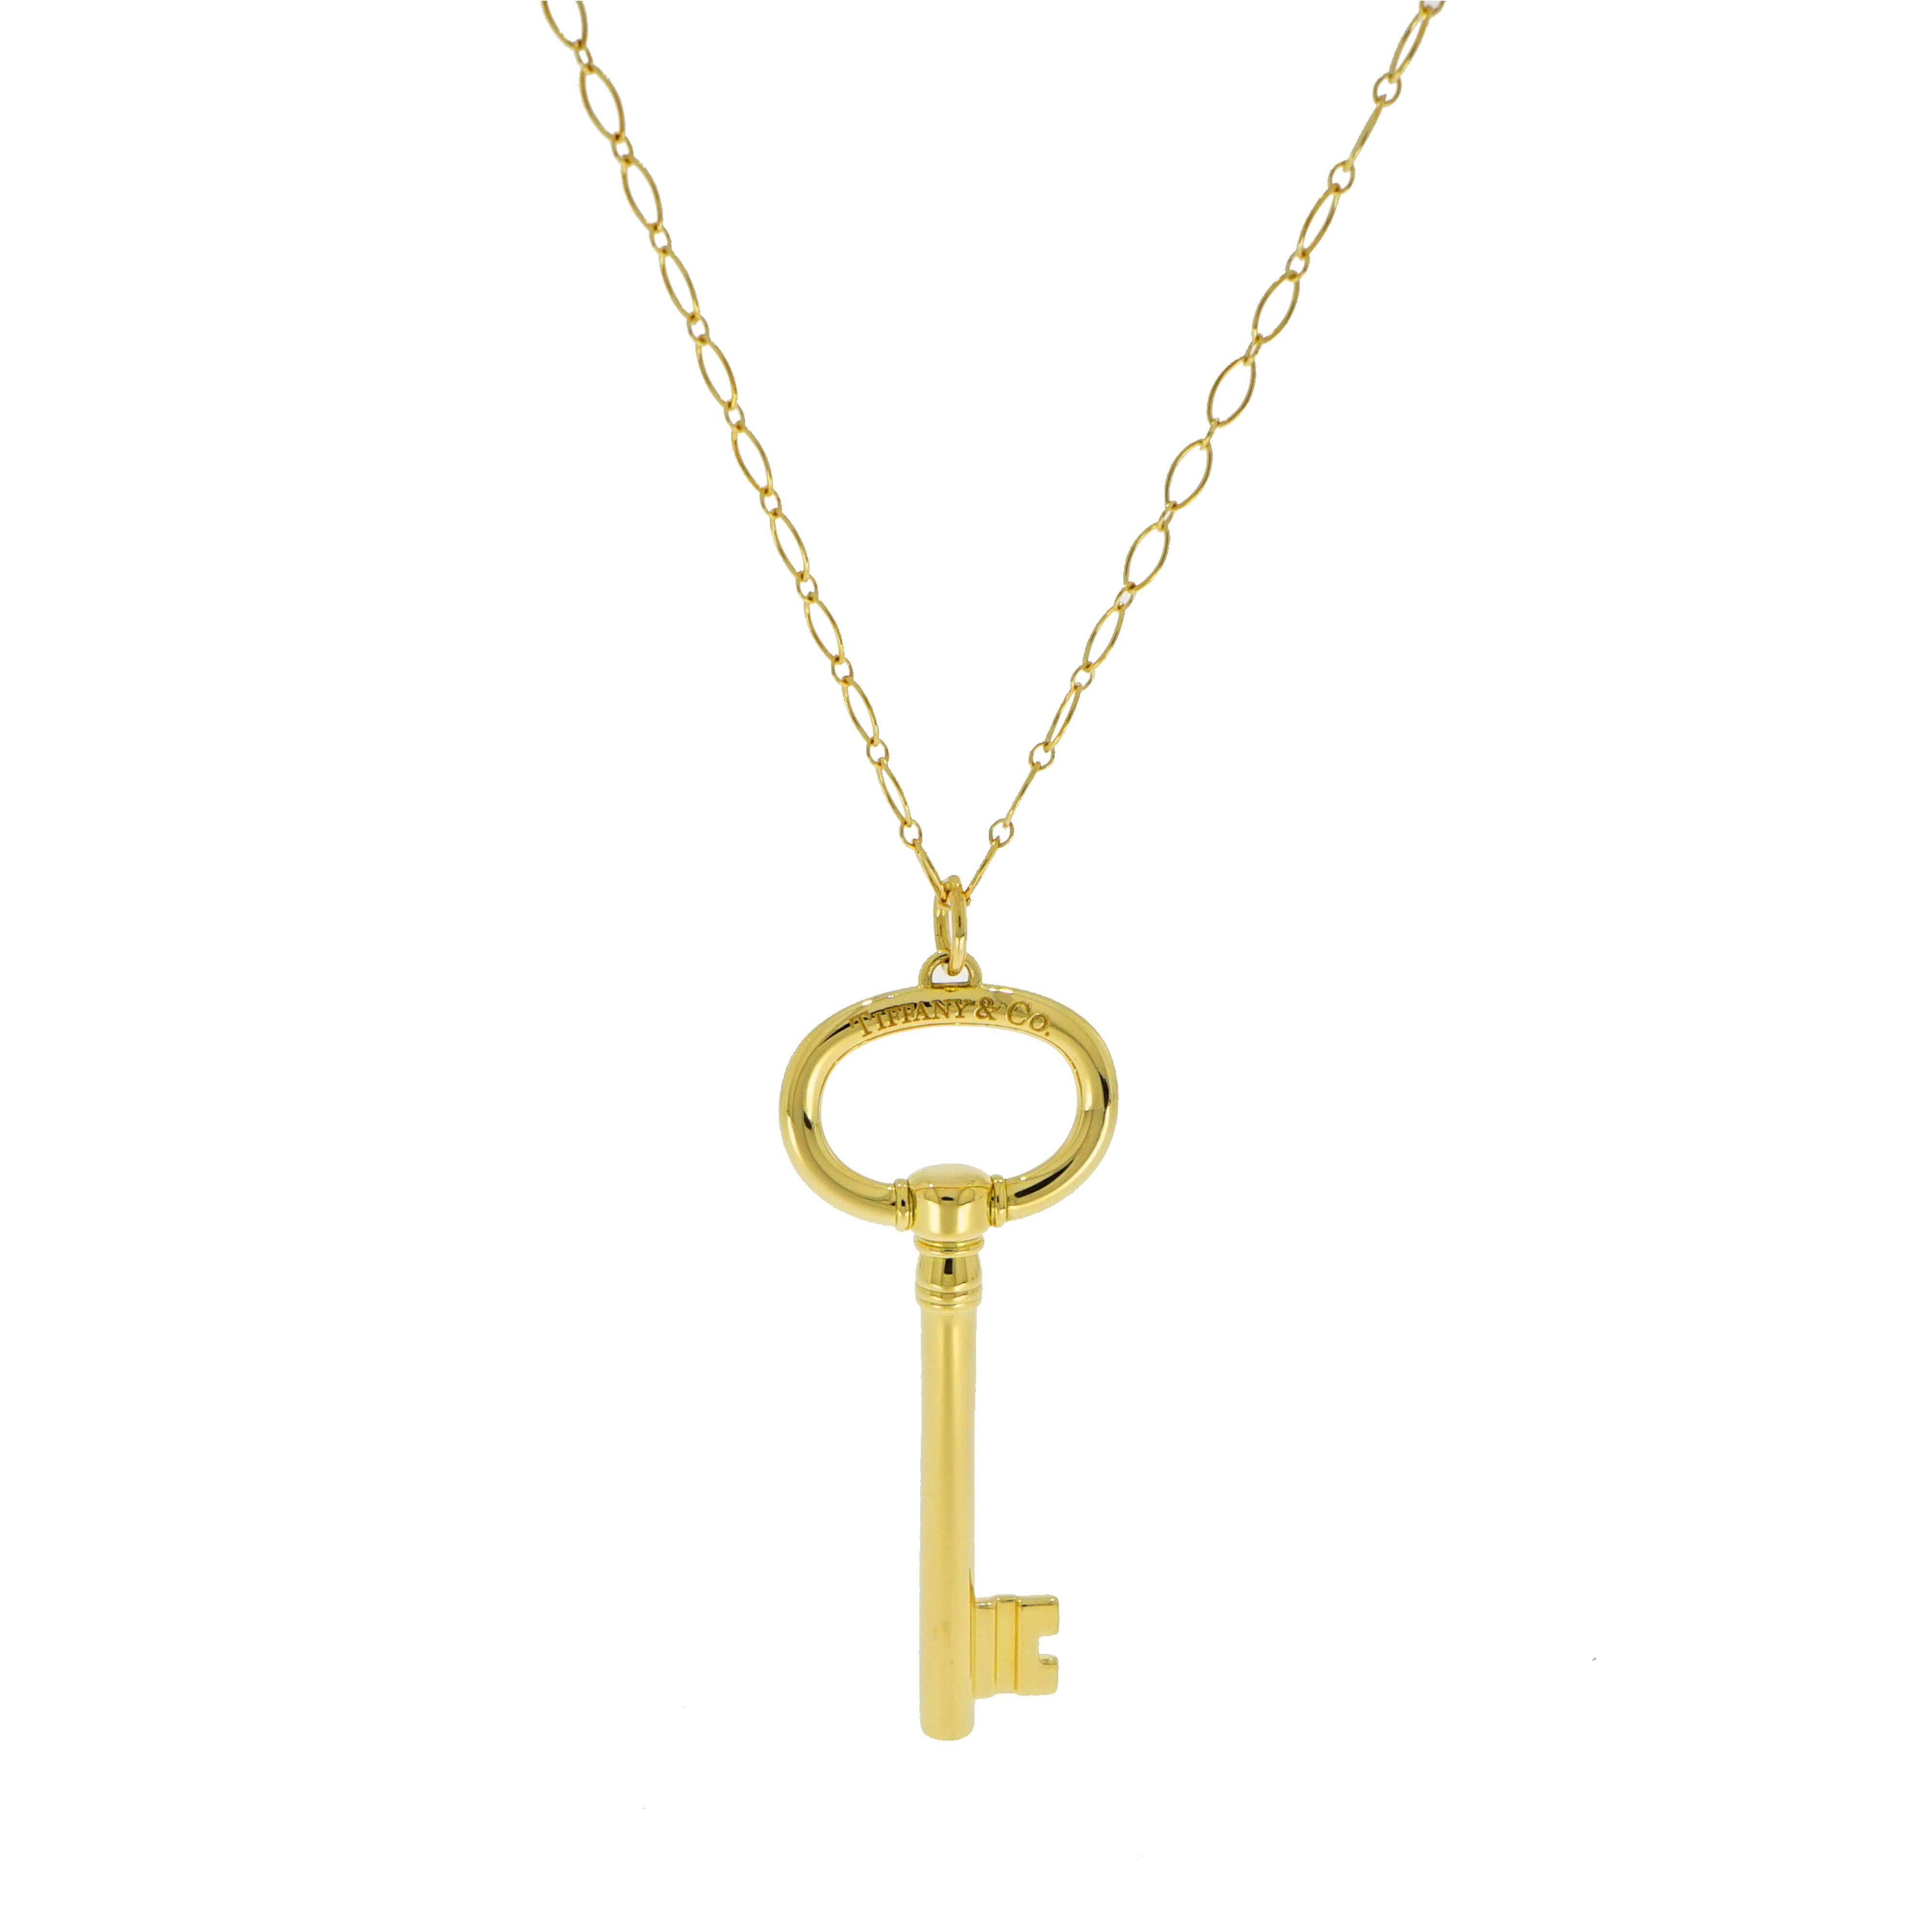 Tiffany & Co. Key Pendant with Yellow Gold Chain